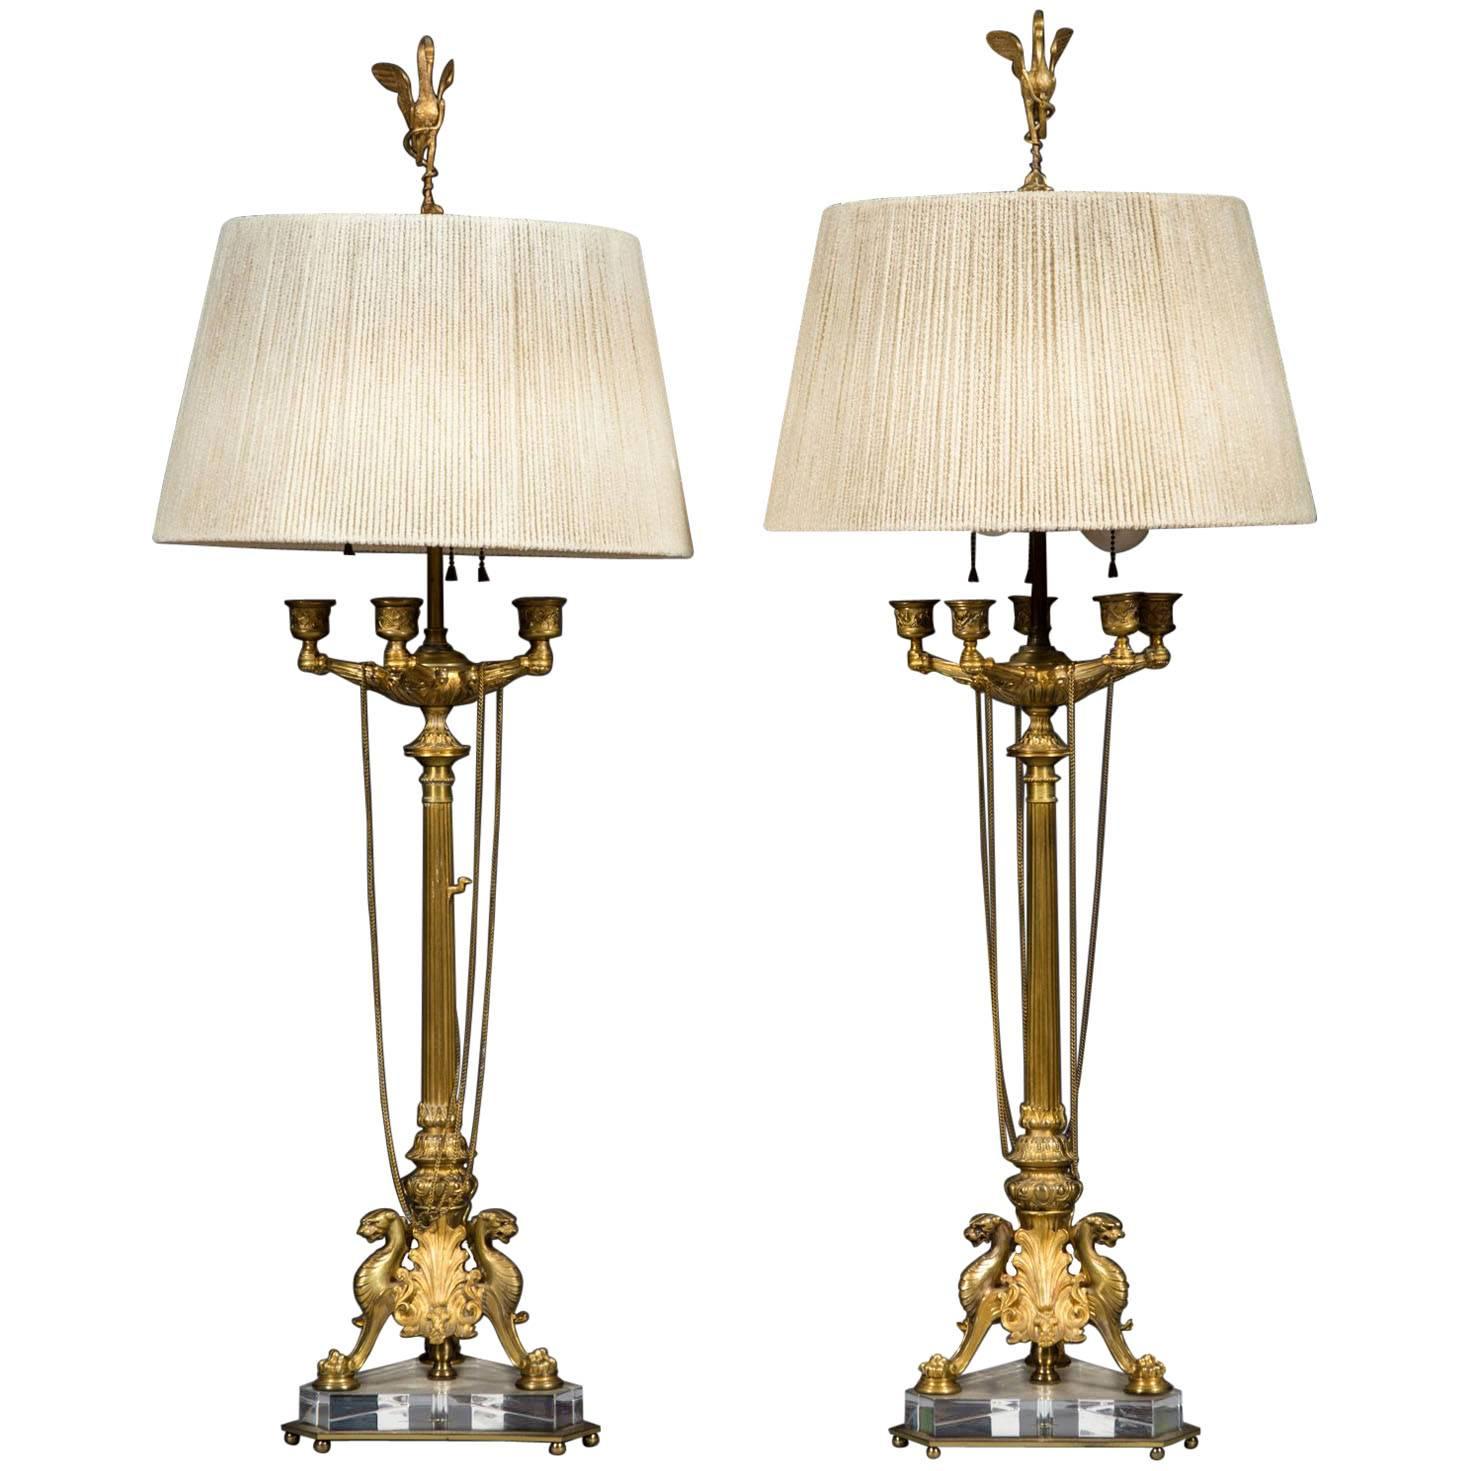 Very Fine Pair of 19th Century French Gilt Bronze Five-Branch Candelabras For Sale